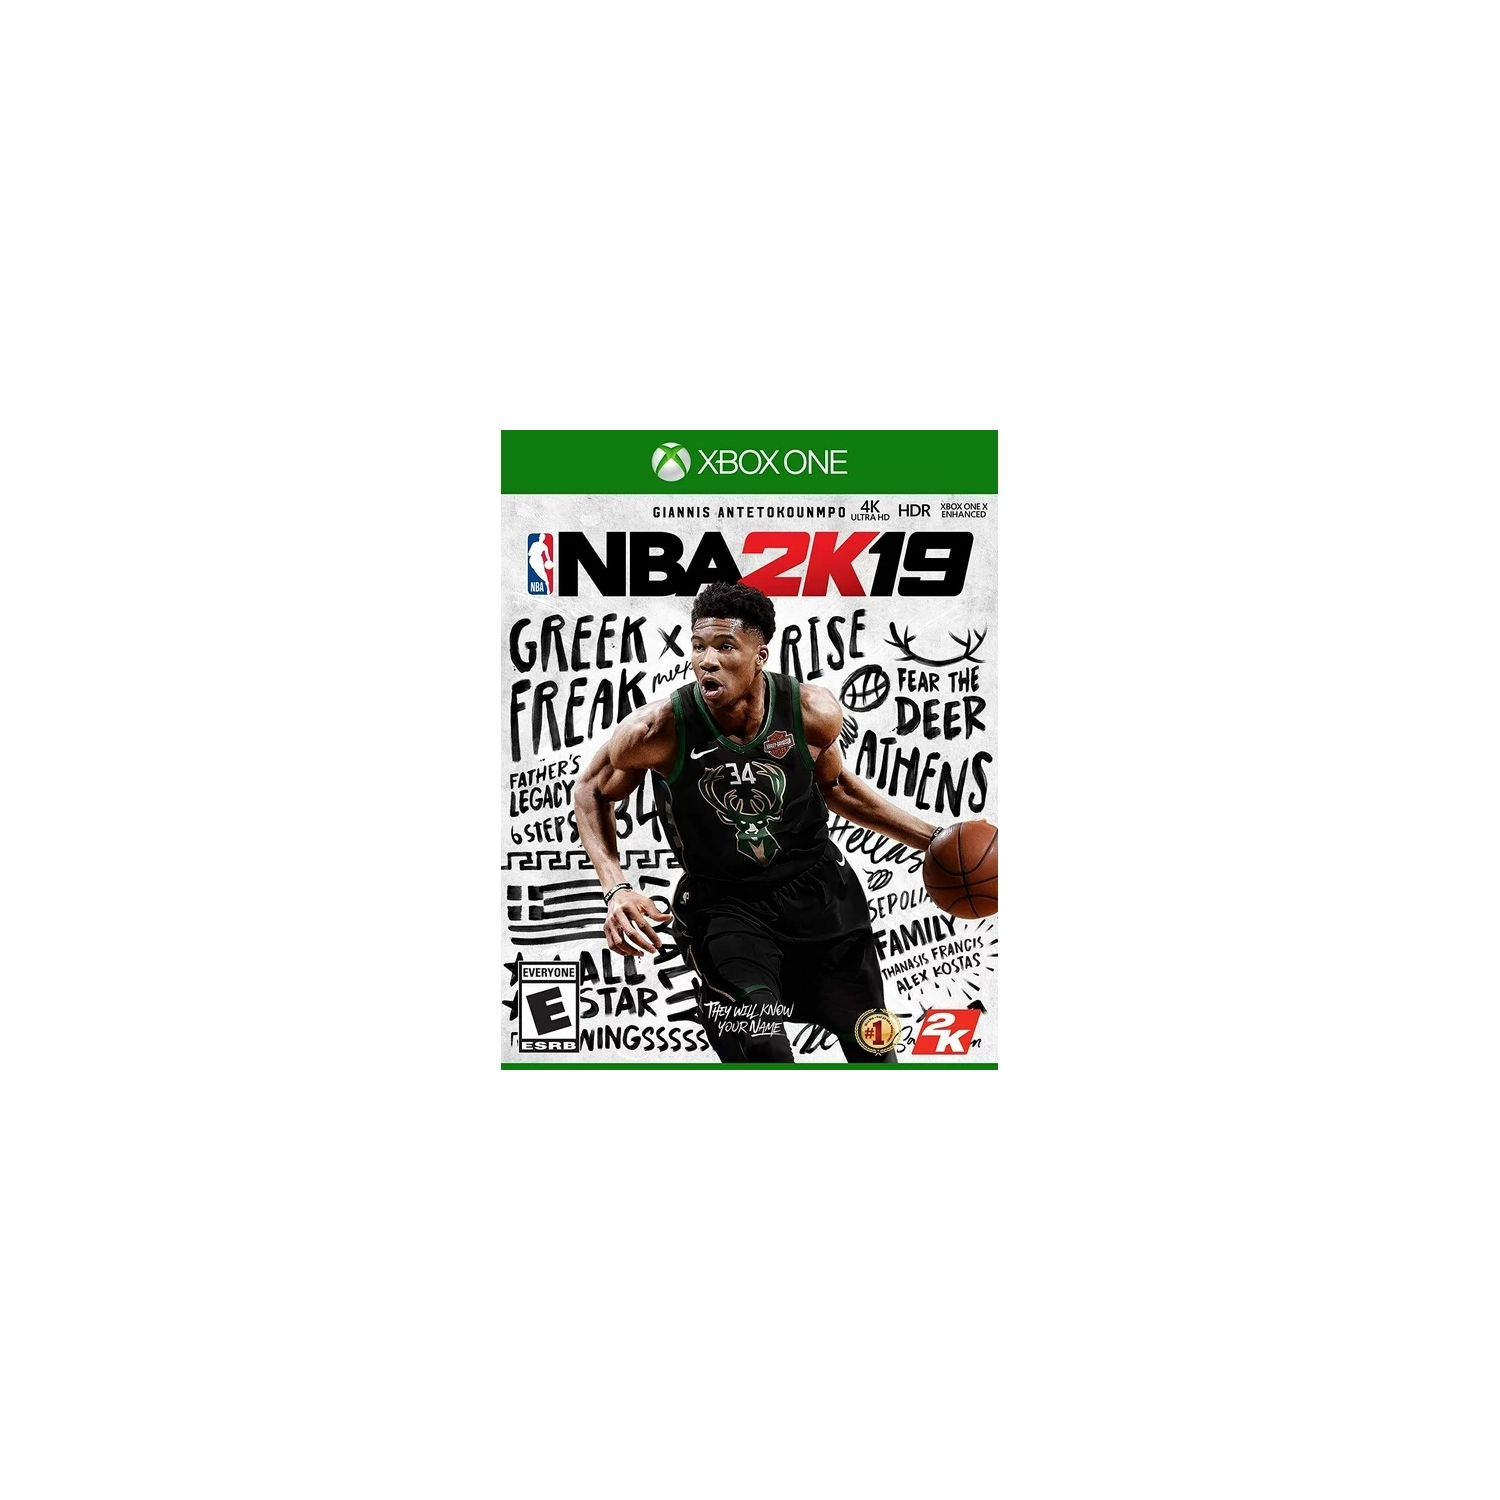 NBA 2K19 for Xbox One [VIDEOGAMES]